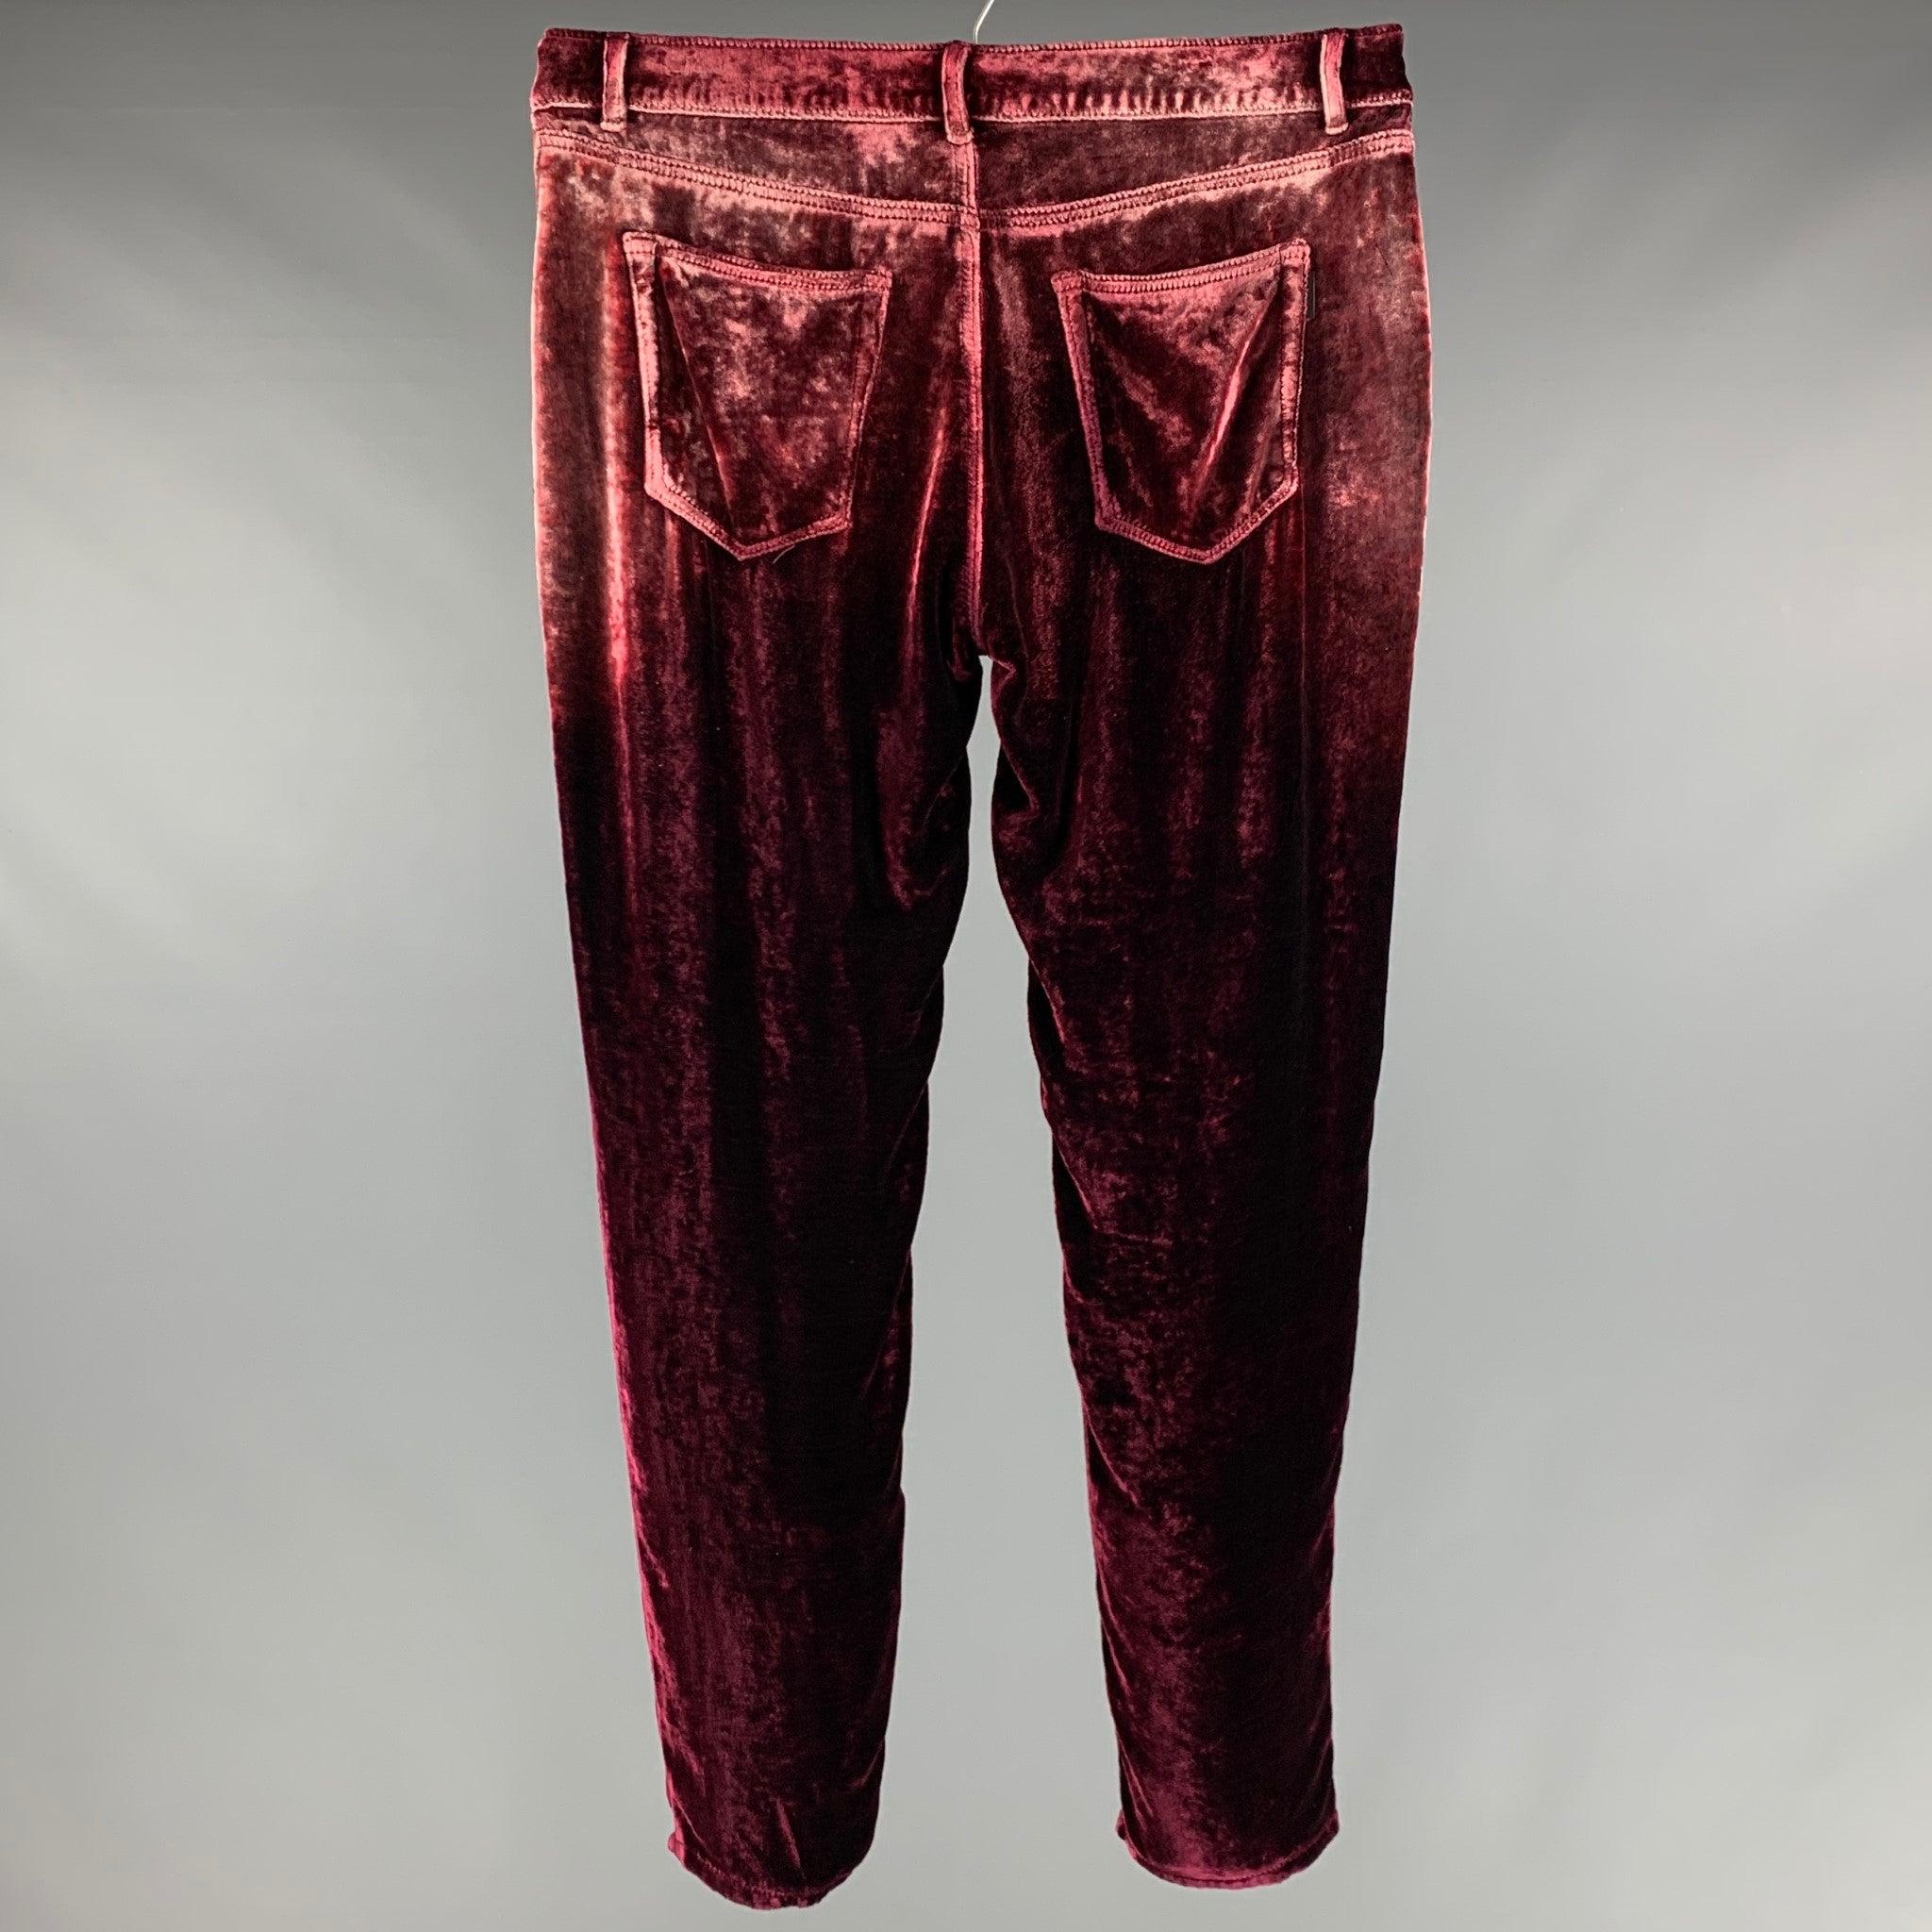 SAINT LAURENT Size 33 Burgundy Velvet Viscose Silk Jean Cut Casual Pants In Good Condition For Sale In San Francisco, CA